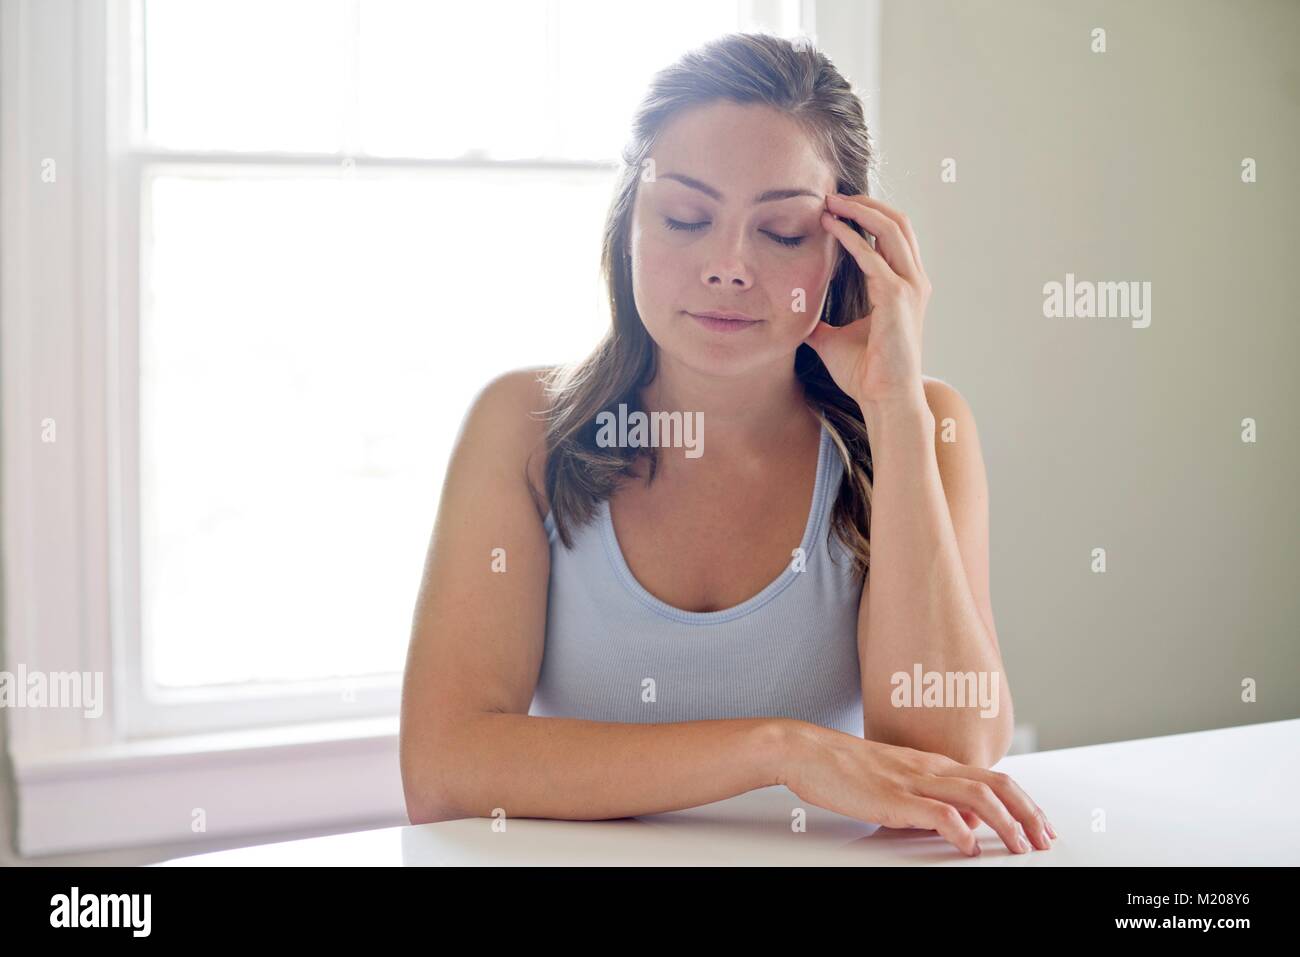 Portrait of young woman touching head with eyes closed. Stock Photo